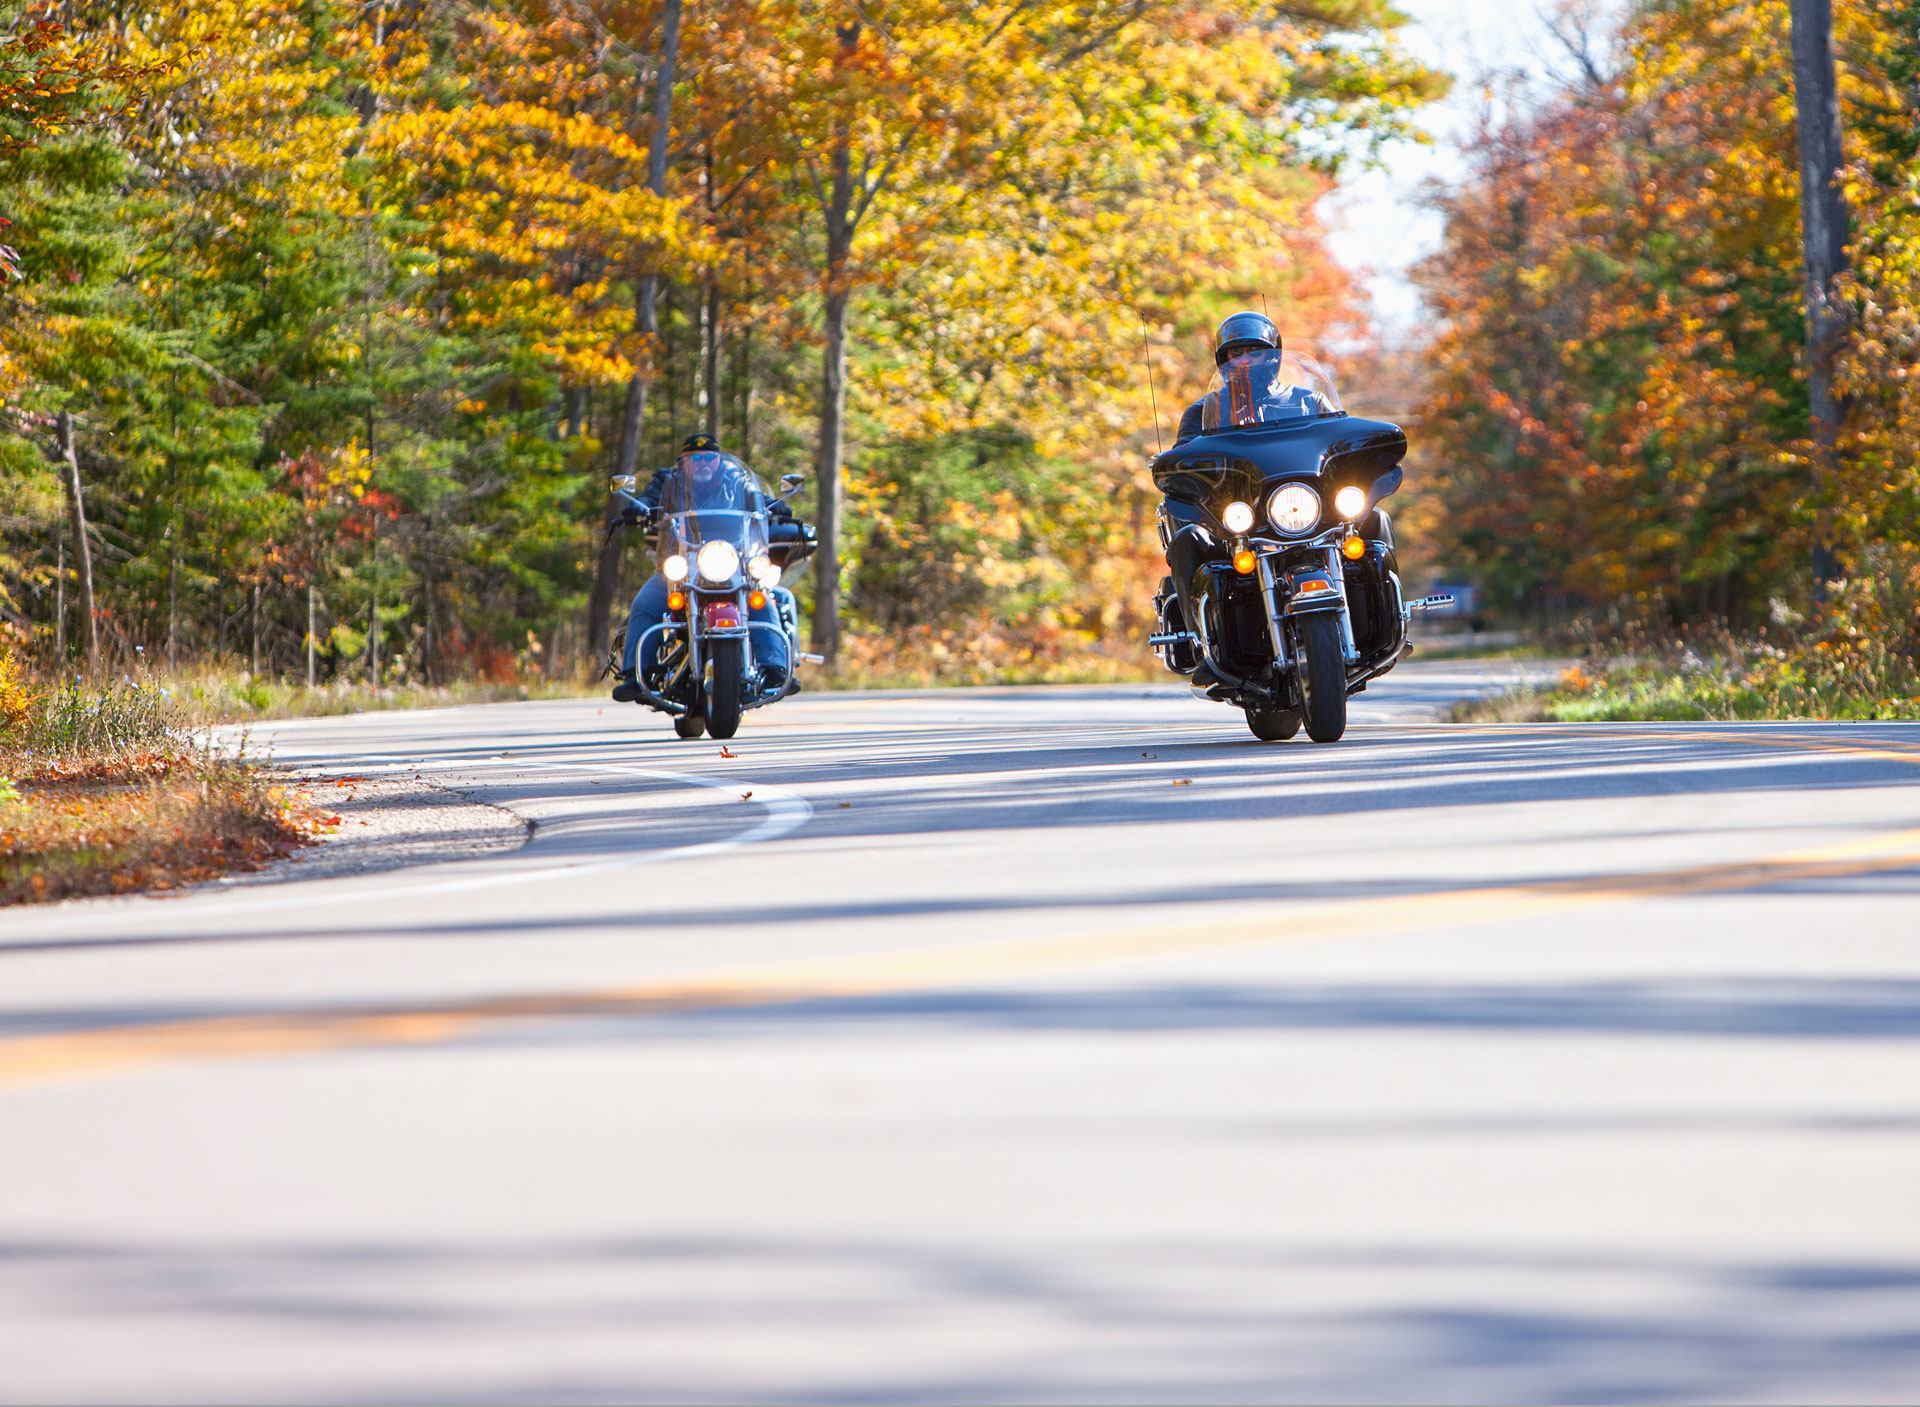 Two motorcyclists on a tree-lined road